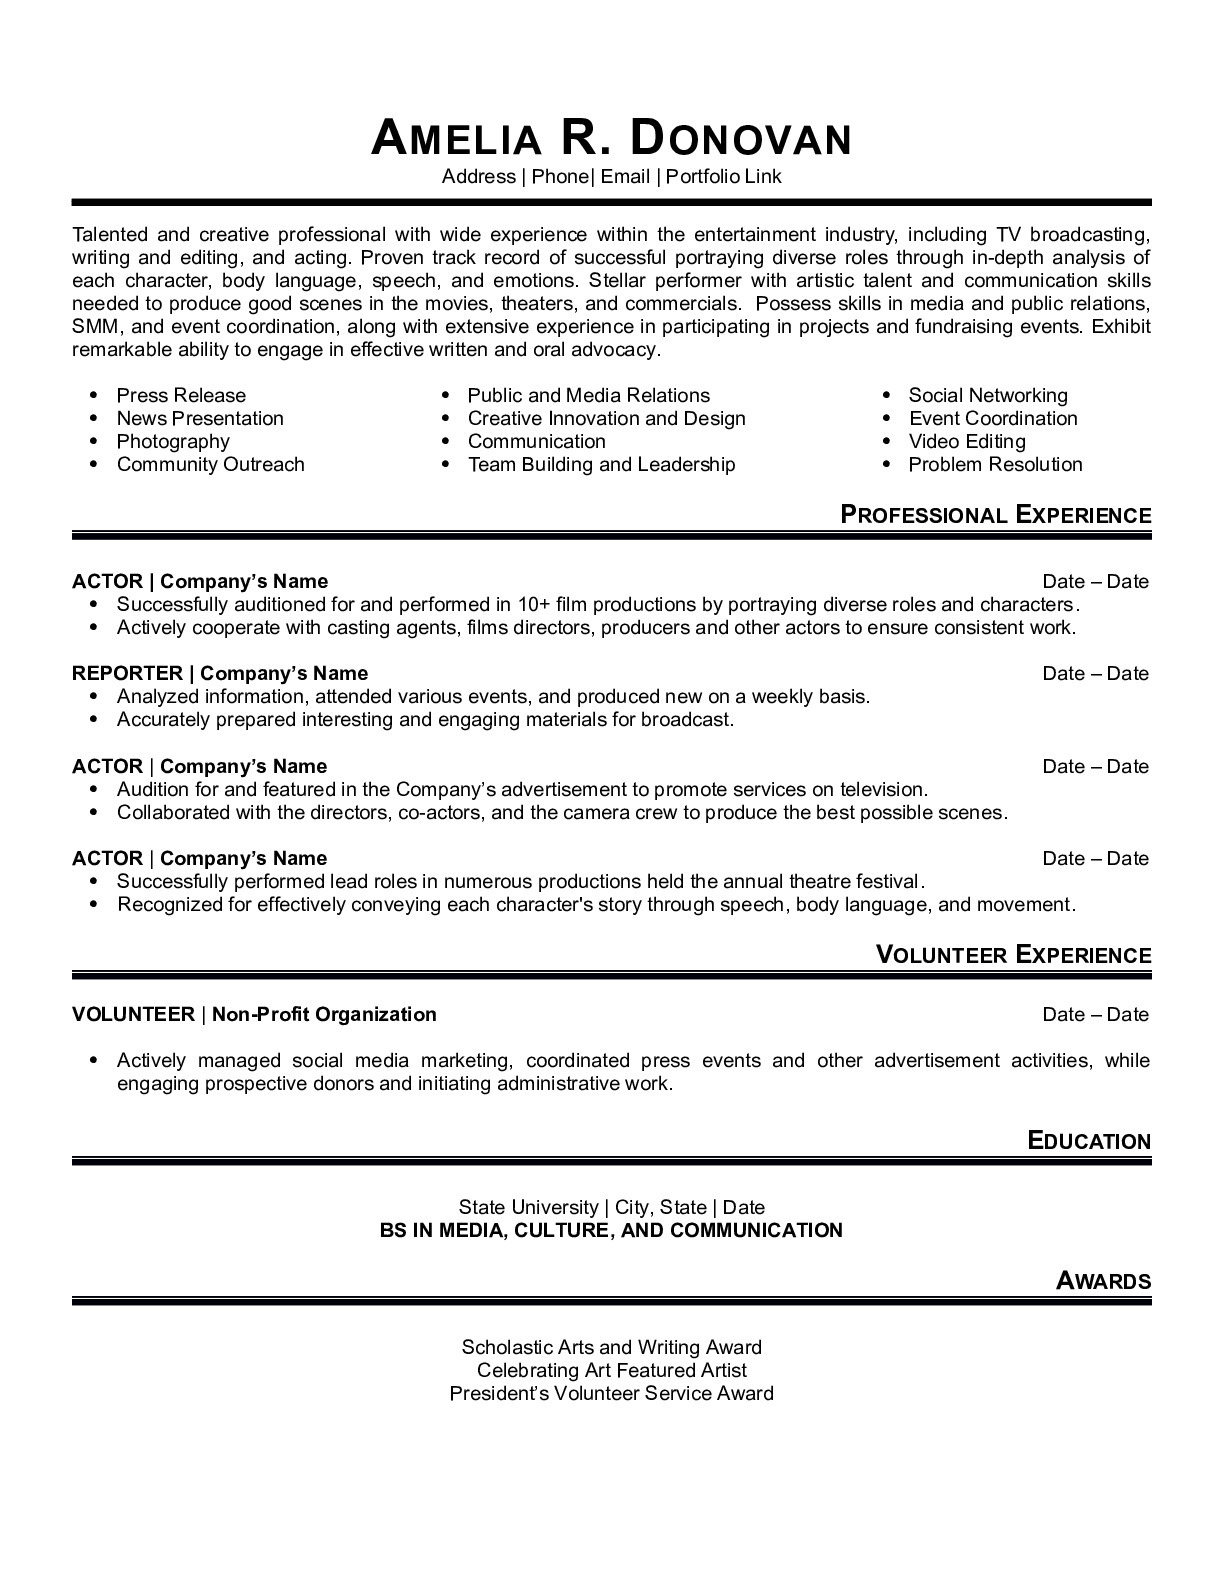 Resume Example for Actor